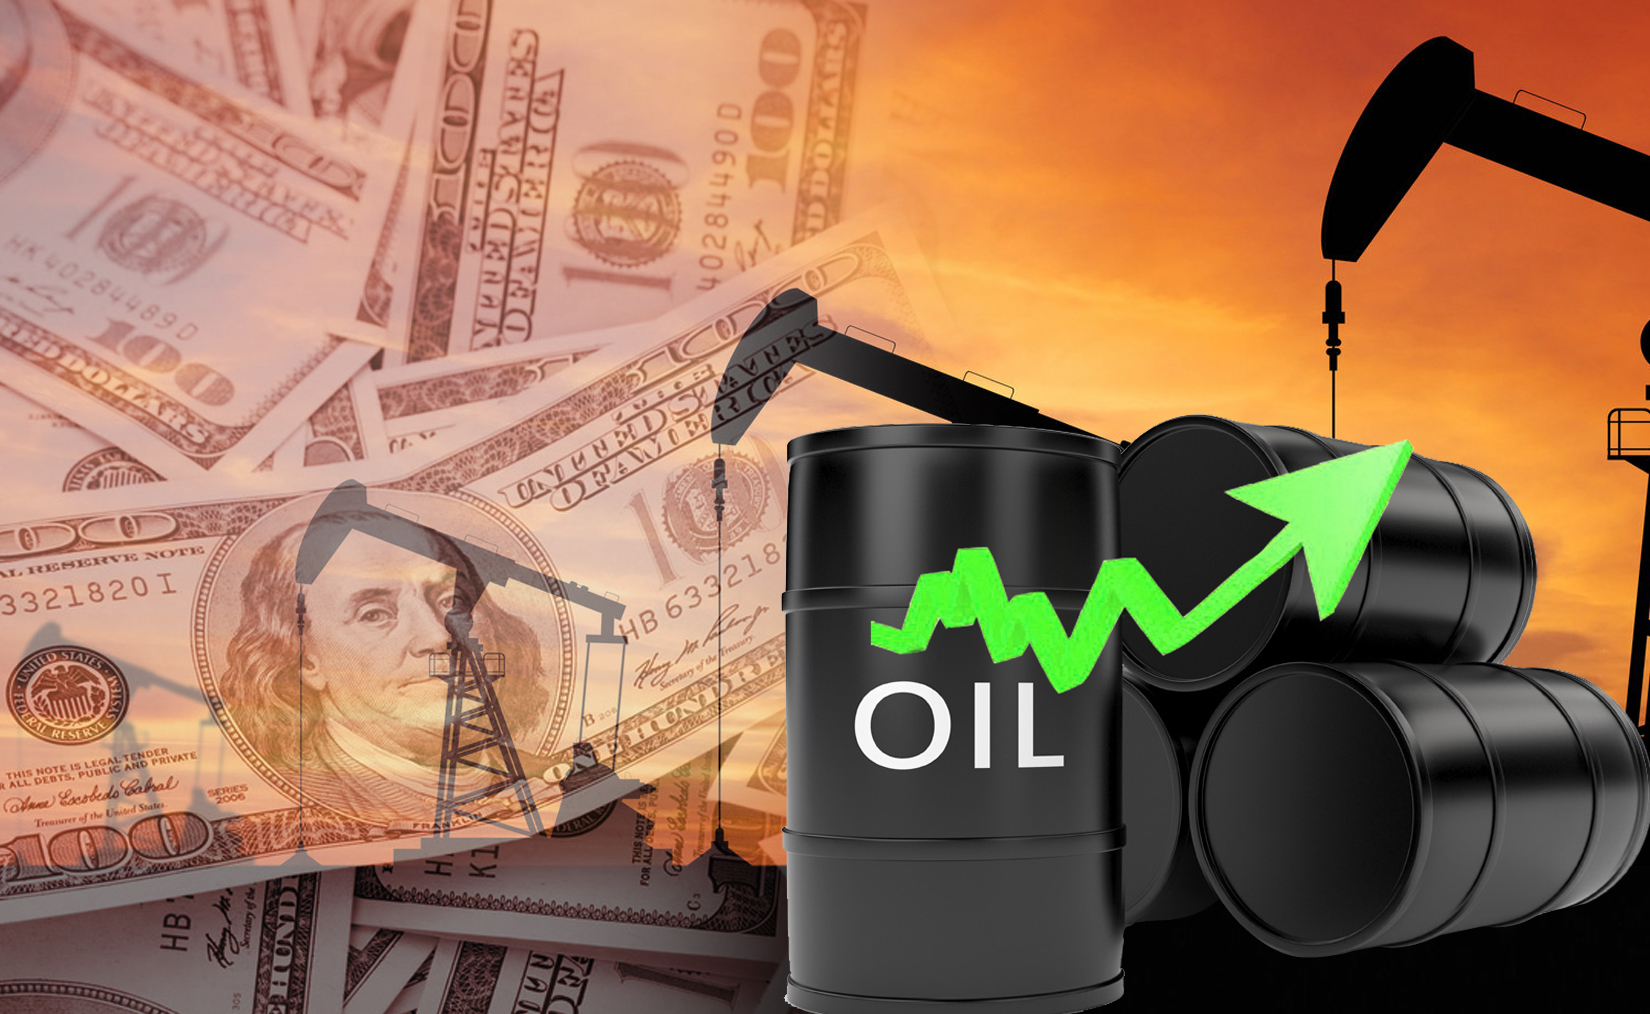 Kuwait oil price up 77 cents to USD 64.73 pb                                                                                                                                                                                                              